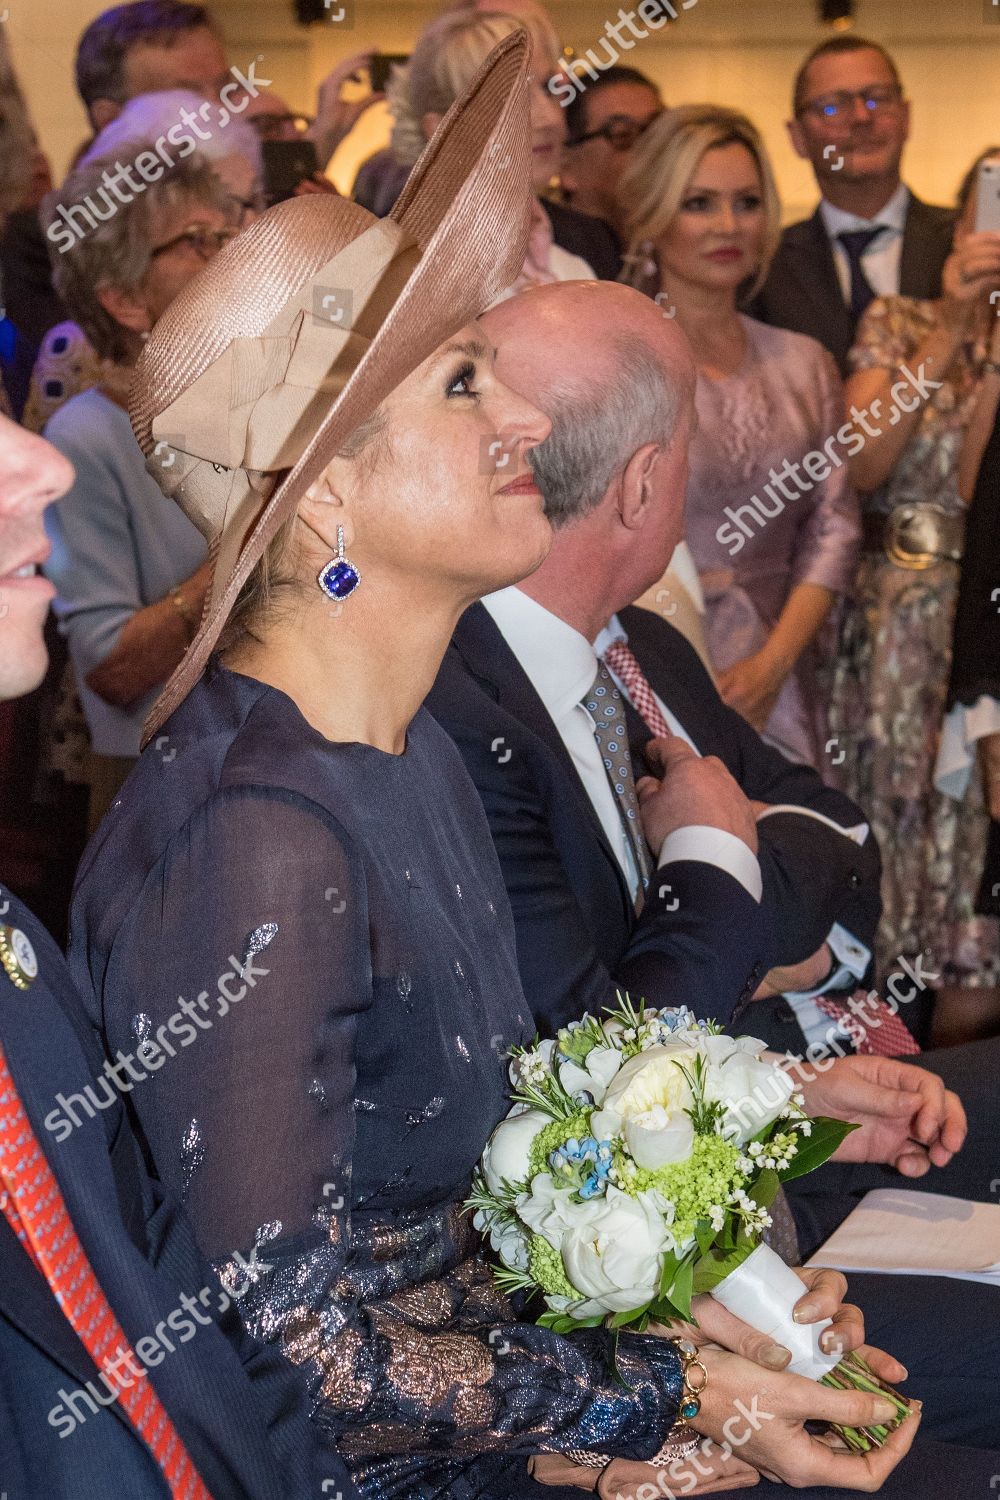 queen-maxima-visit-to-the-bavaria-brewery-lieshout-netherlands-shutterstock-editorial-10180868ay.jpg